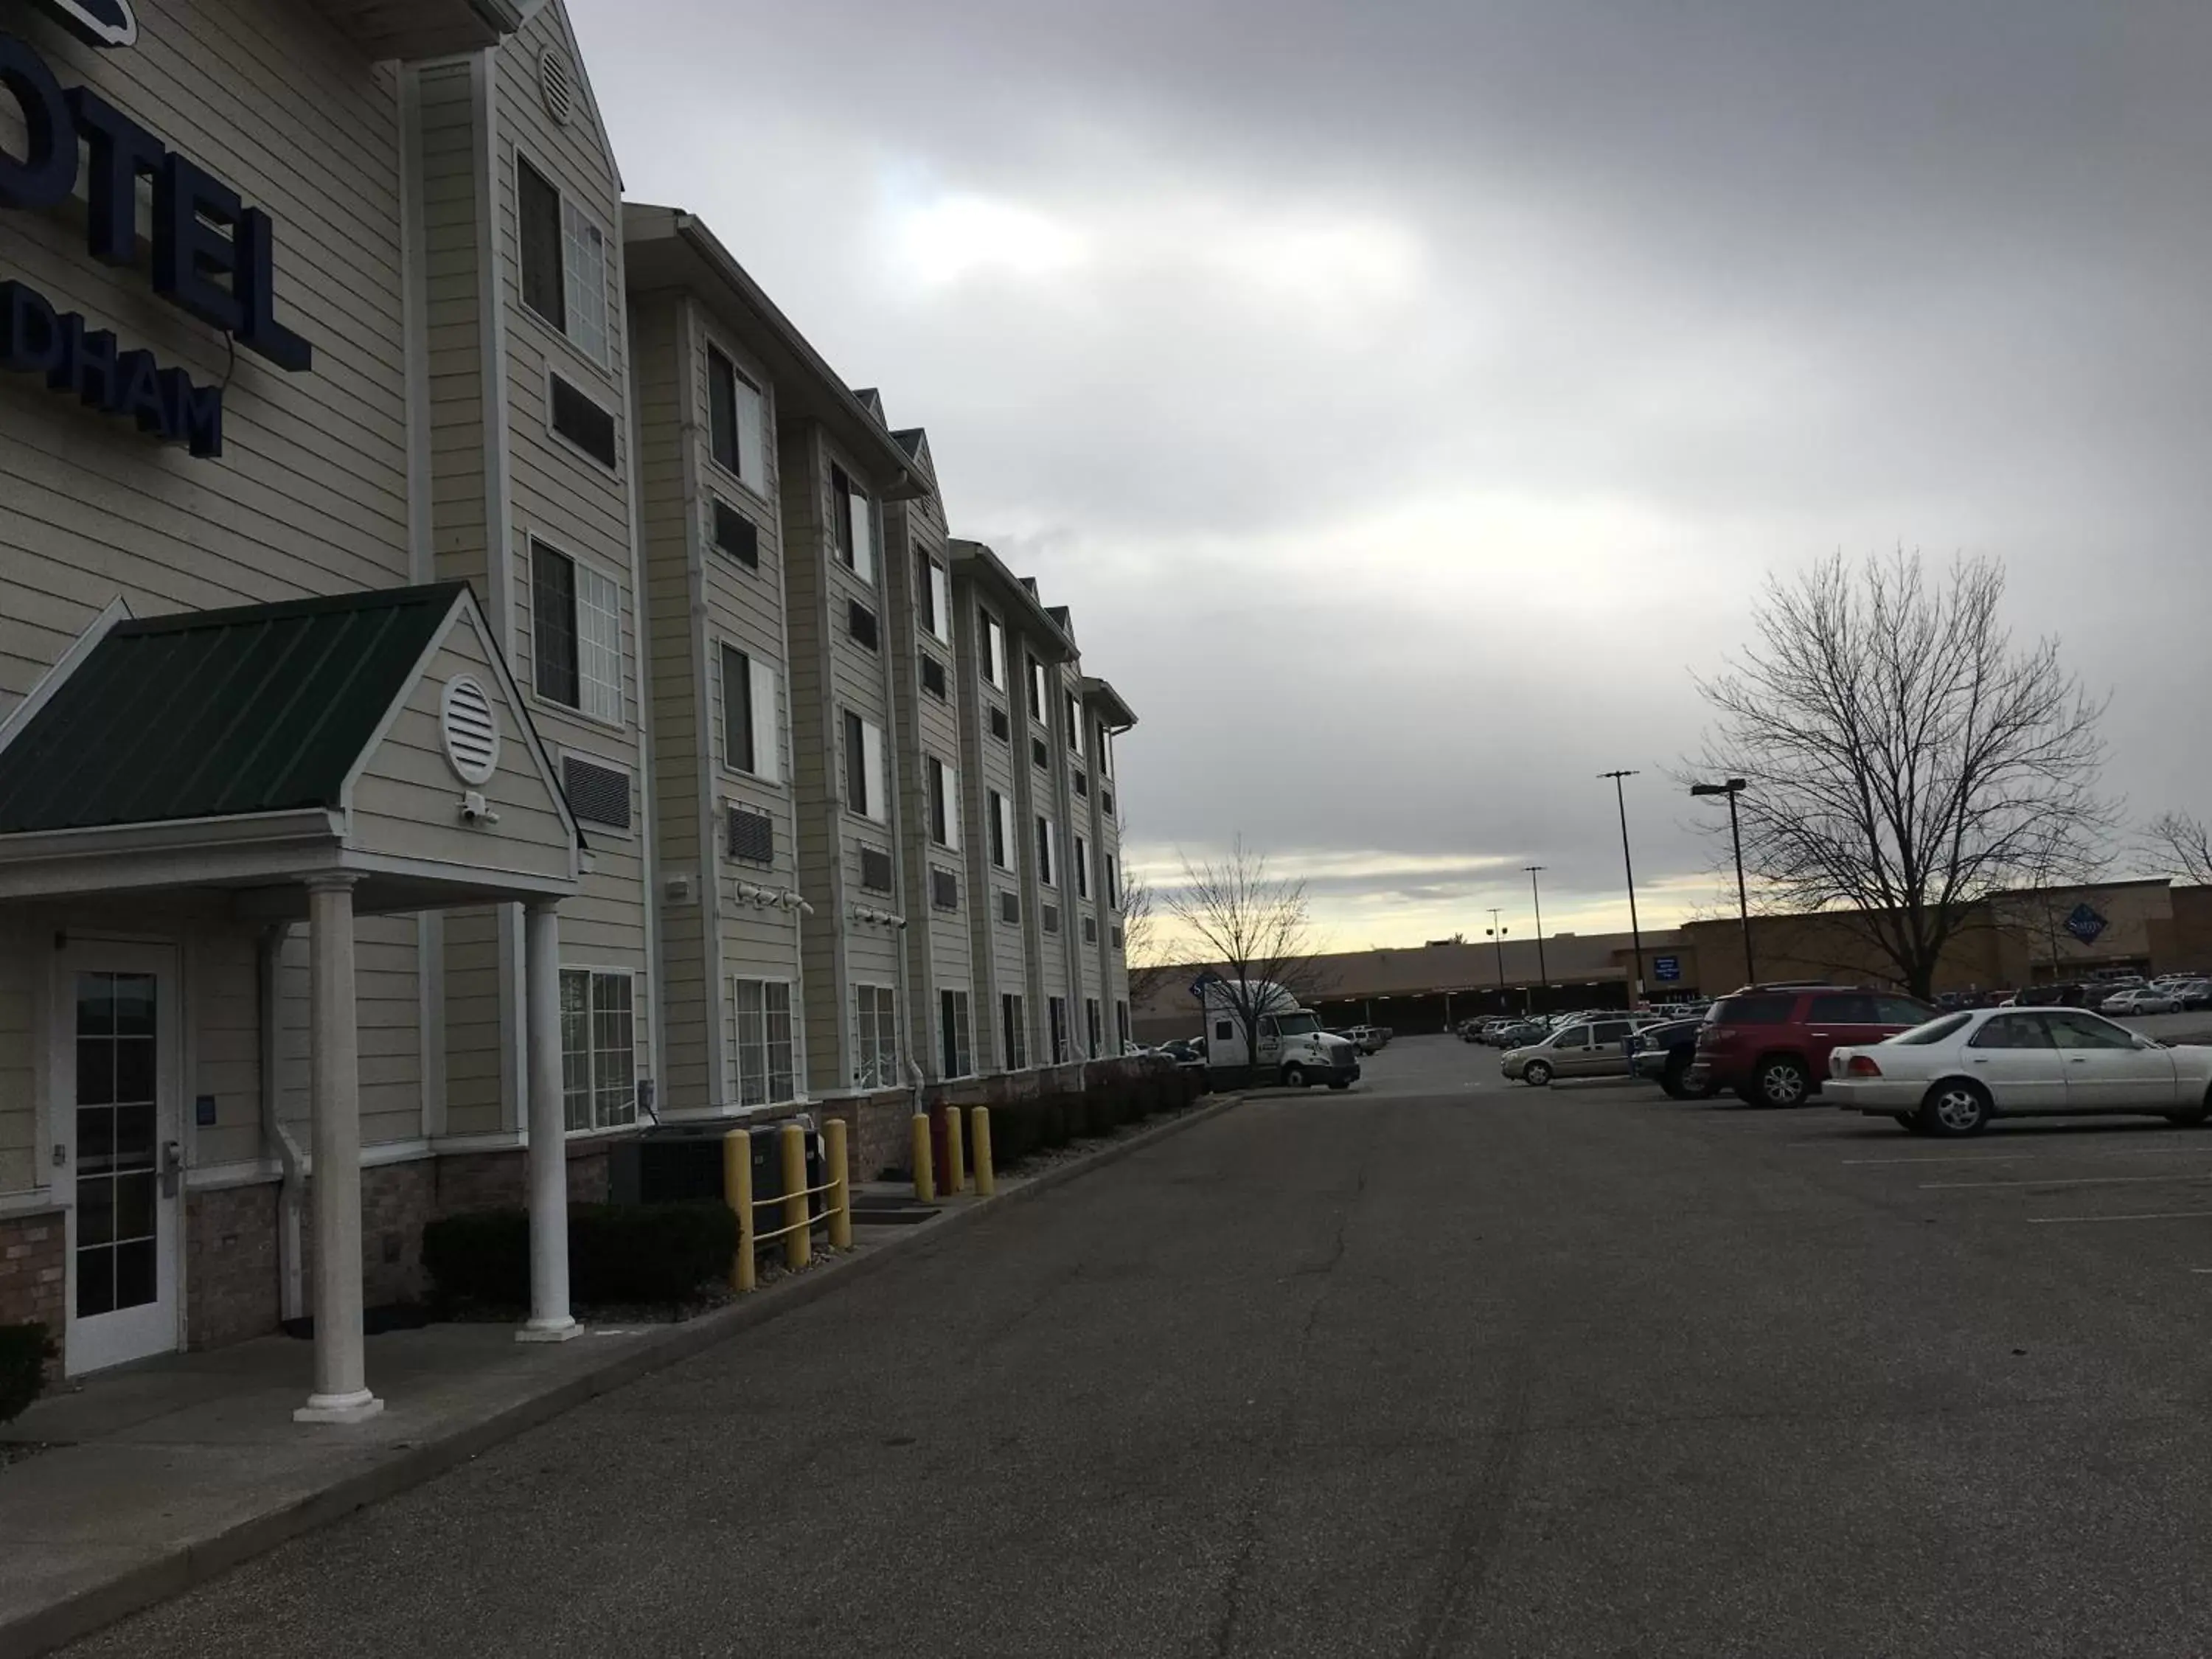 Property building in Microtel Inn & Suites by Wyndham Indianapolis Airport